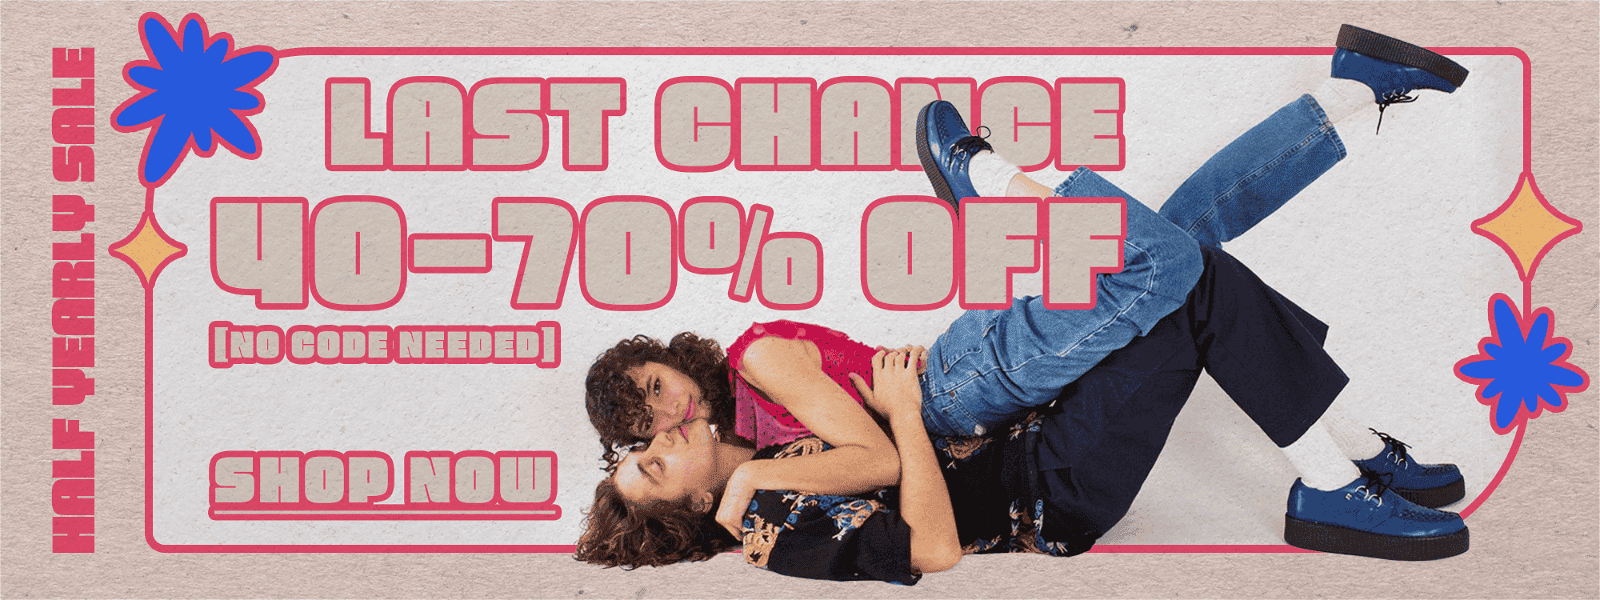 Shop the Half Yearly Sale